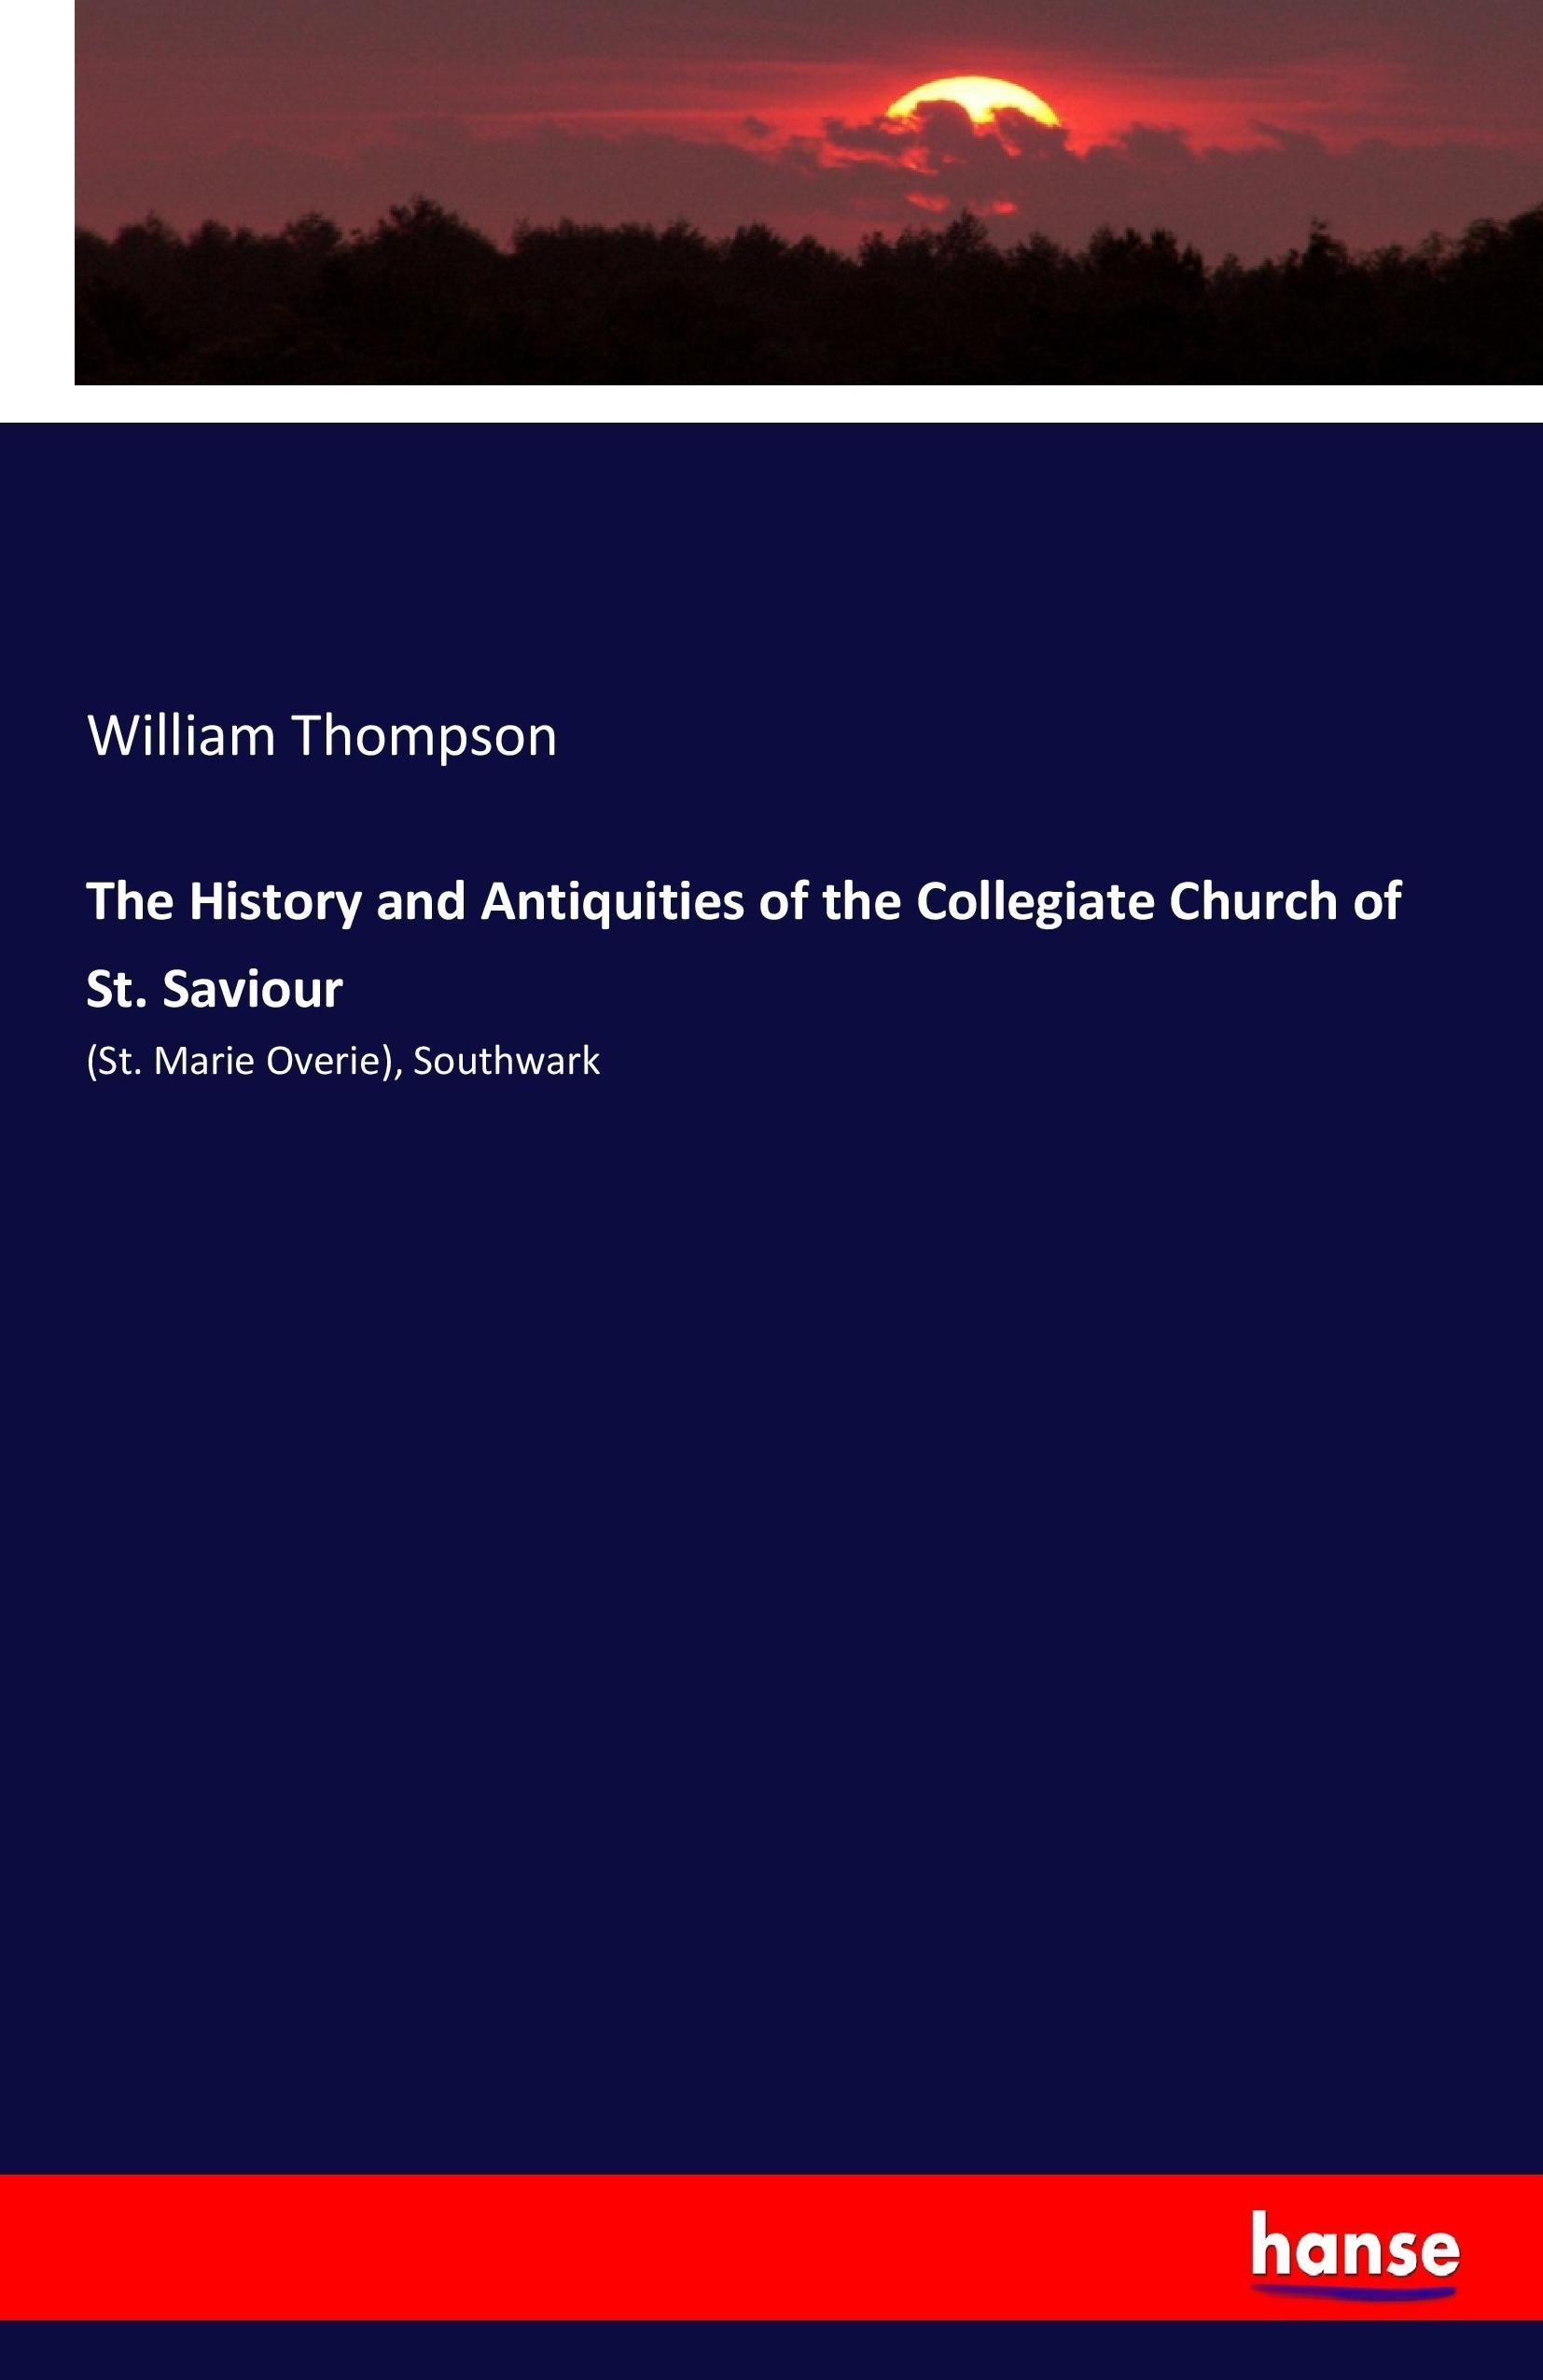 The History and Antiquities of the Collegiate Church of St. Saviour - Thompson, William